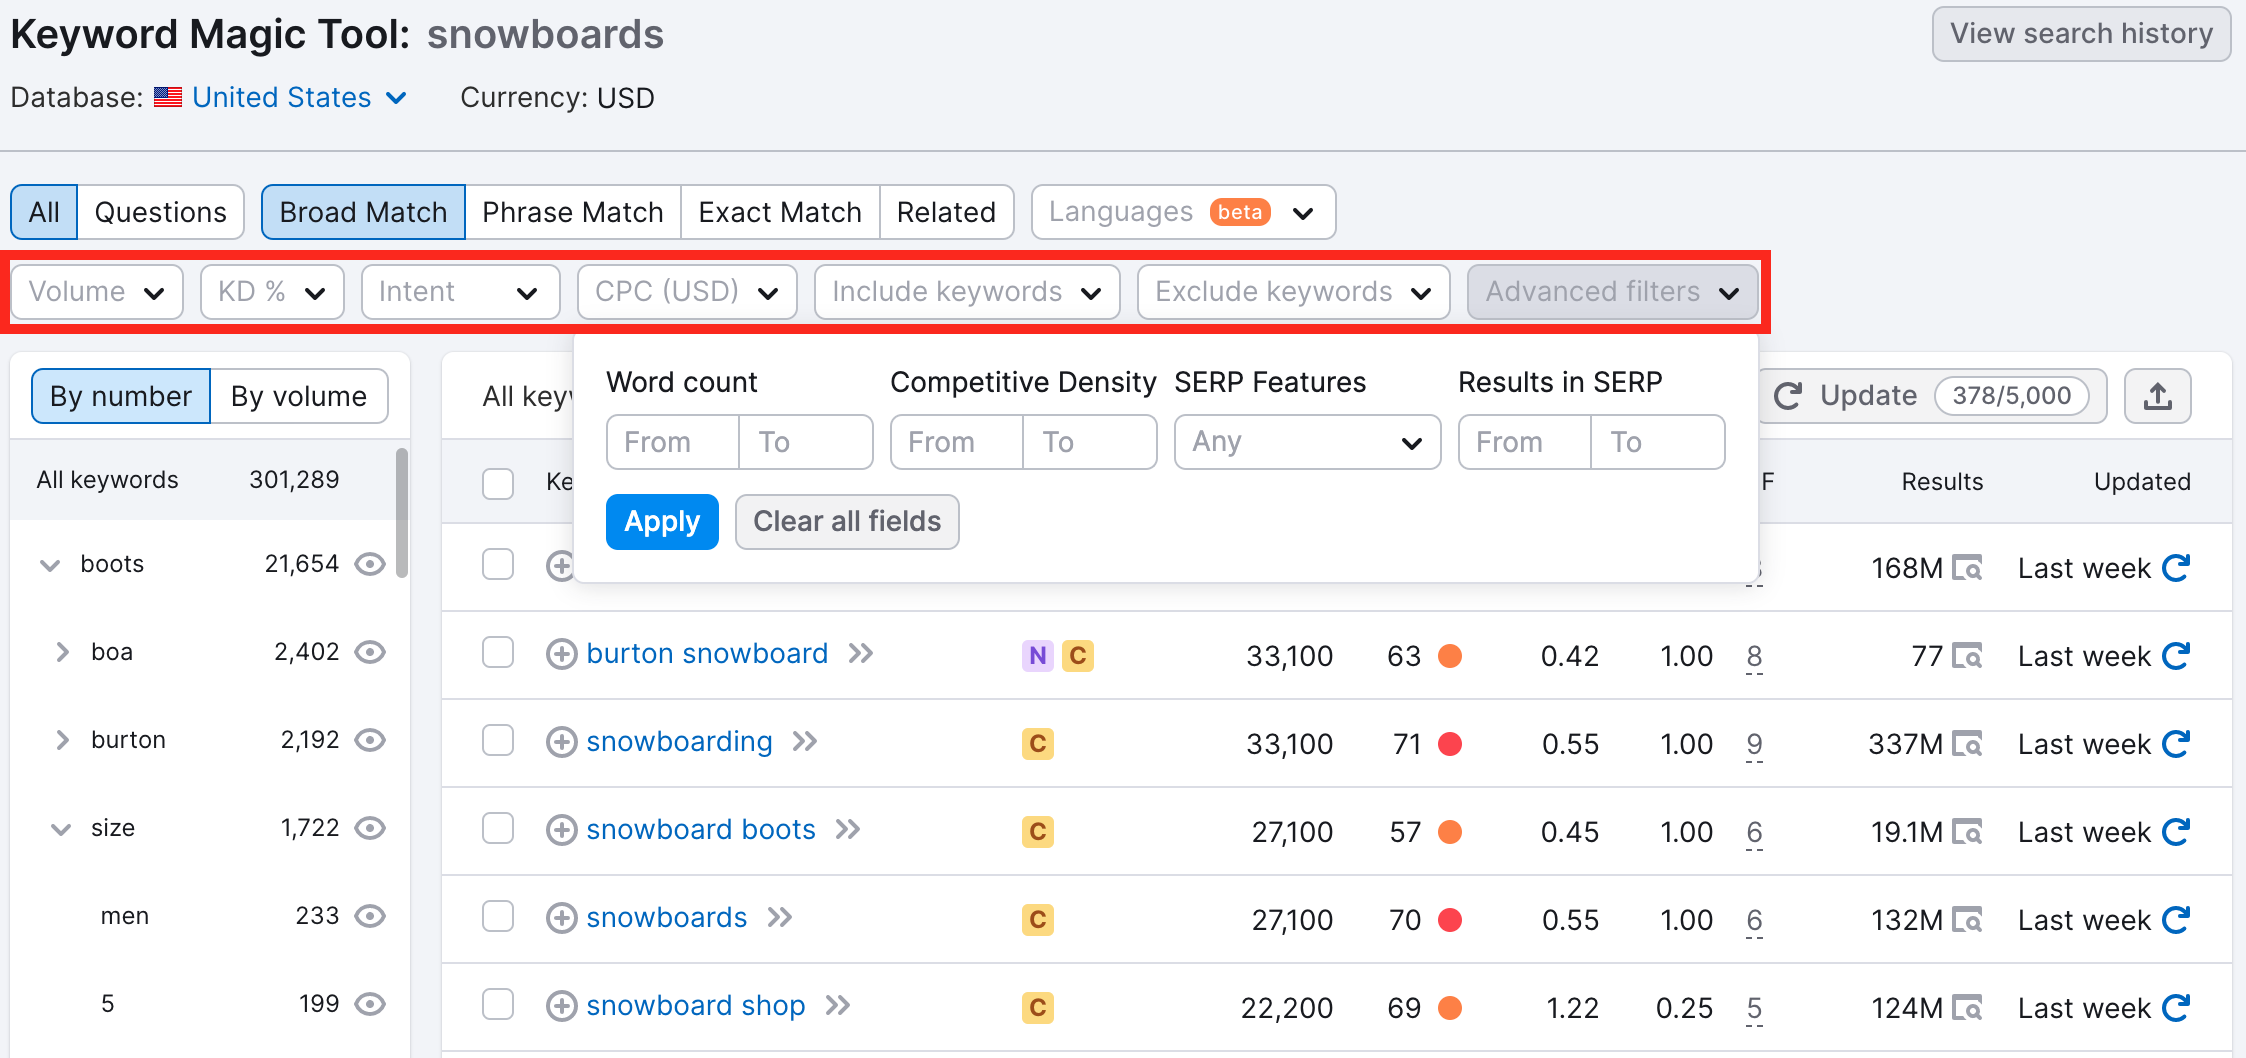 Keyword Magic Tool dashboard with a red rectangle highlighting the filter options: volume, KD%, intent, CPC, Include keywords, Exclude keywords, advanced filters. The advanced filters options have been opened to show the filters: word count, competitive density, SERP features and results in SERP. 